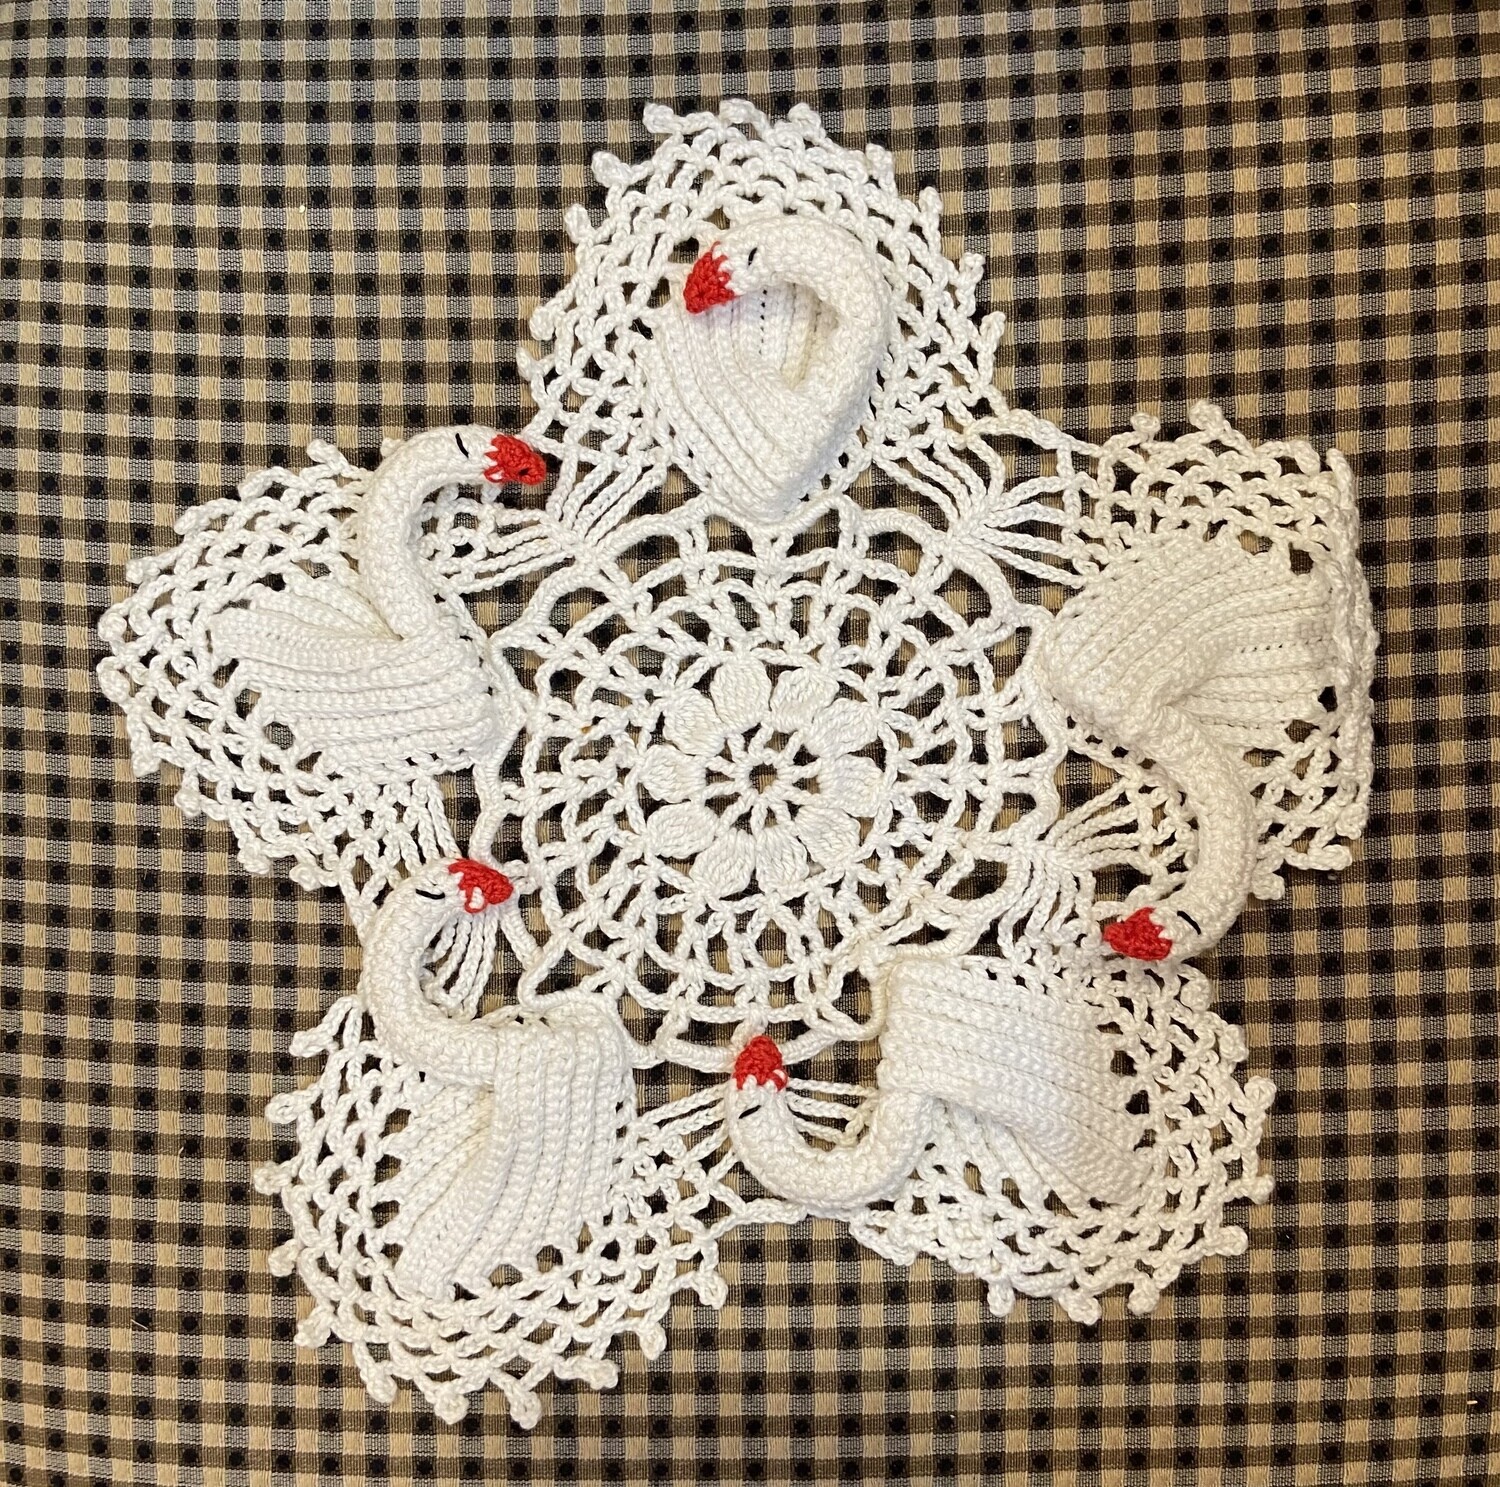 Swan Lace Doily 9”